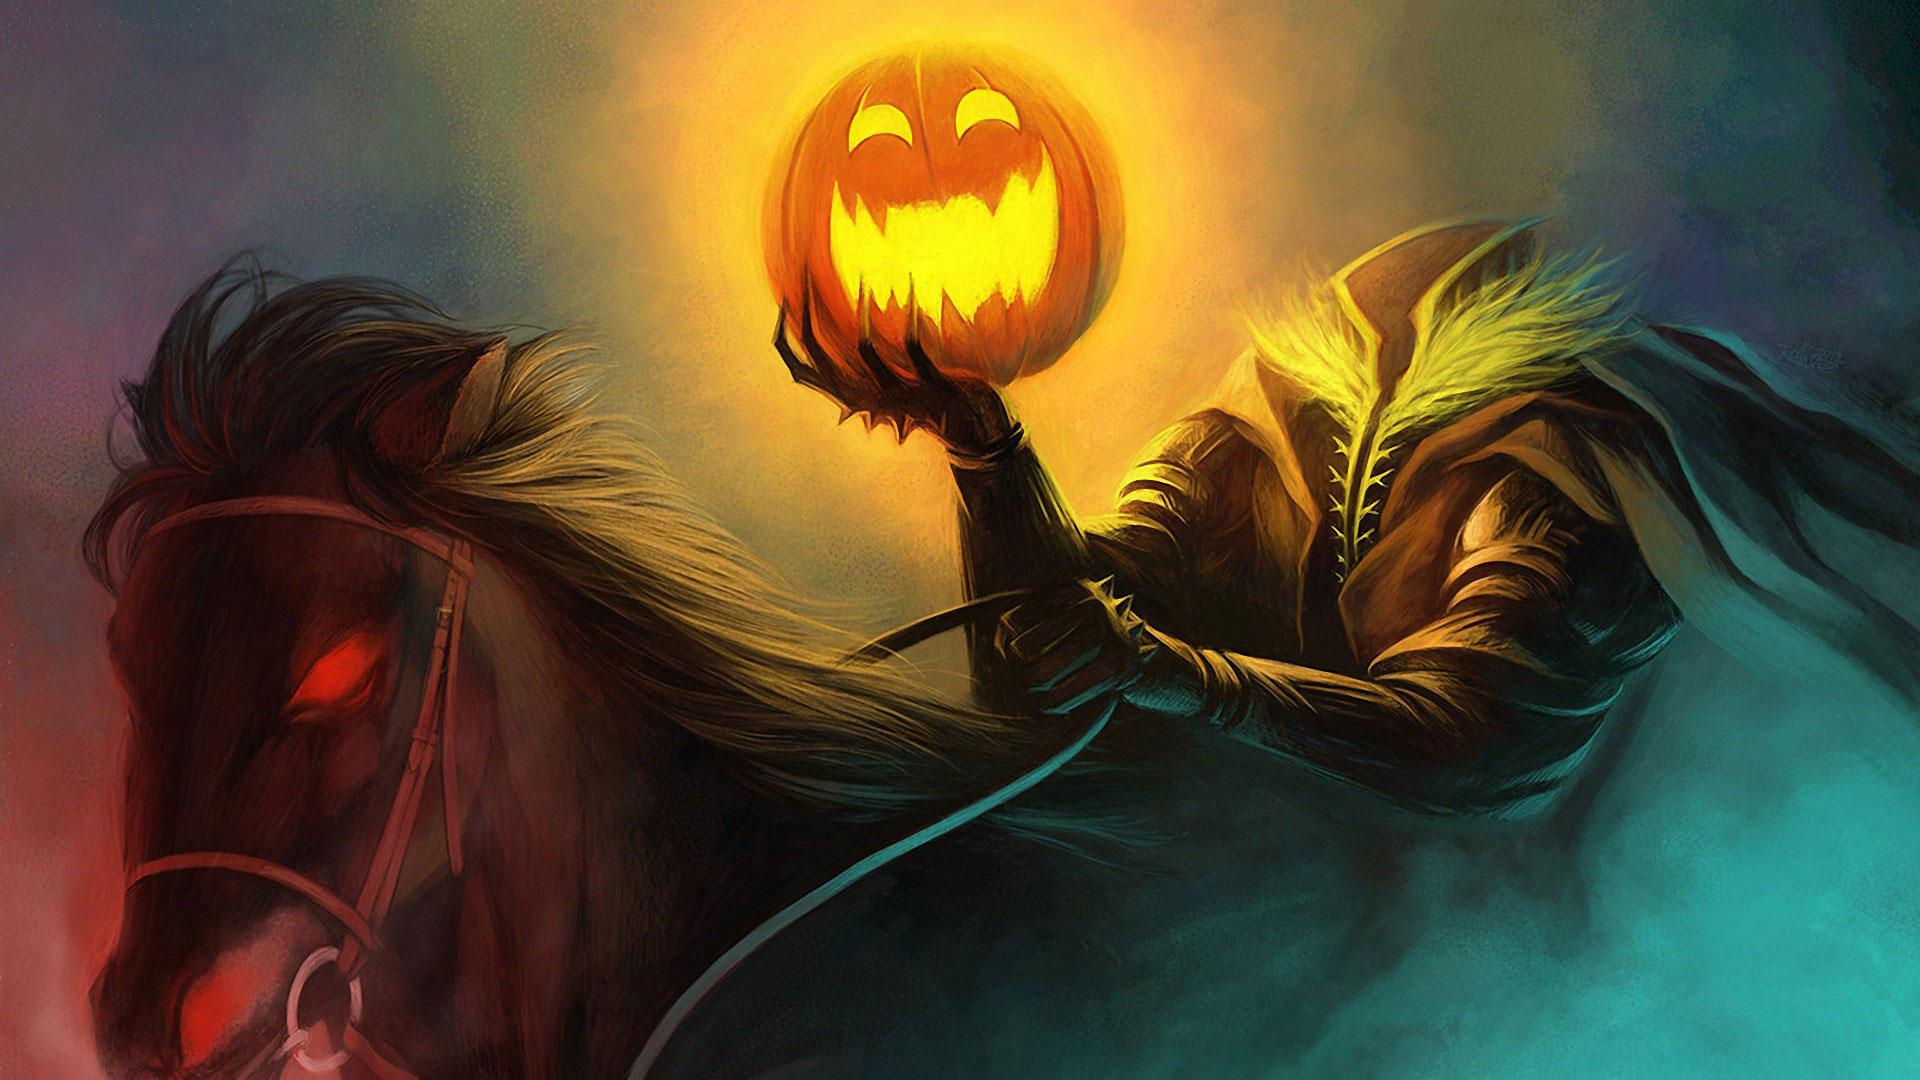 Scary Halloween 2018 HD Wallpaper, Background, Pumpkins, Witches, Spider Web, Bats & Ghosts